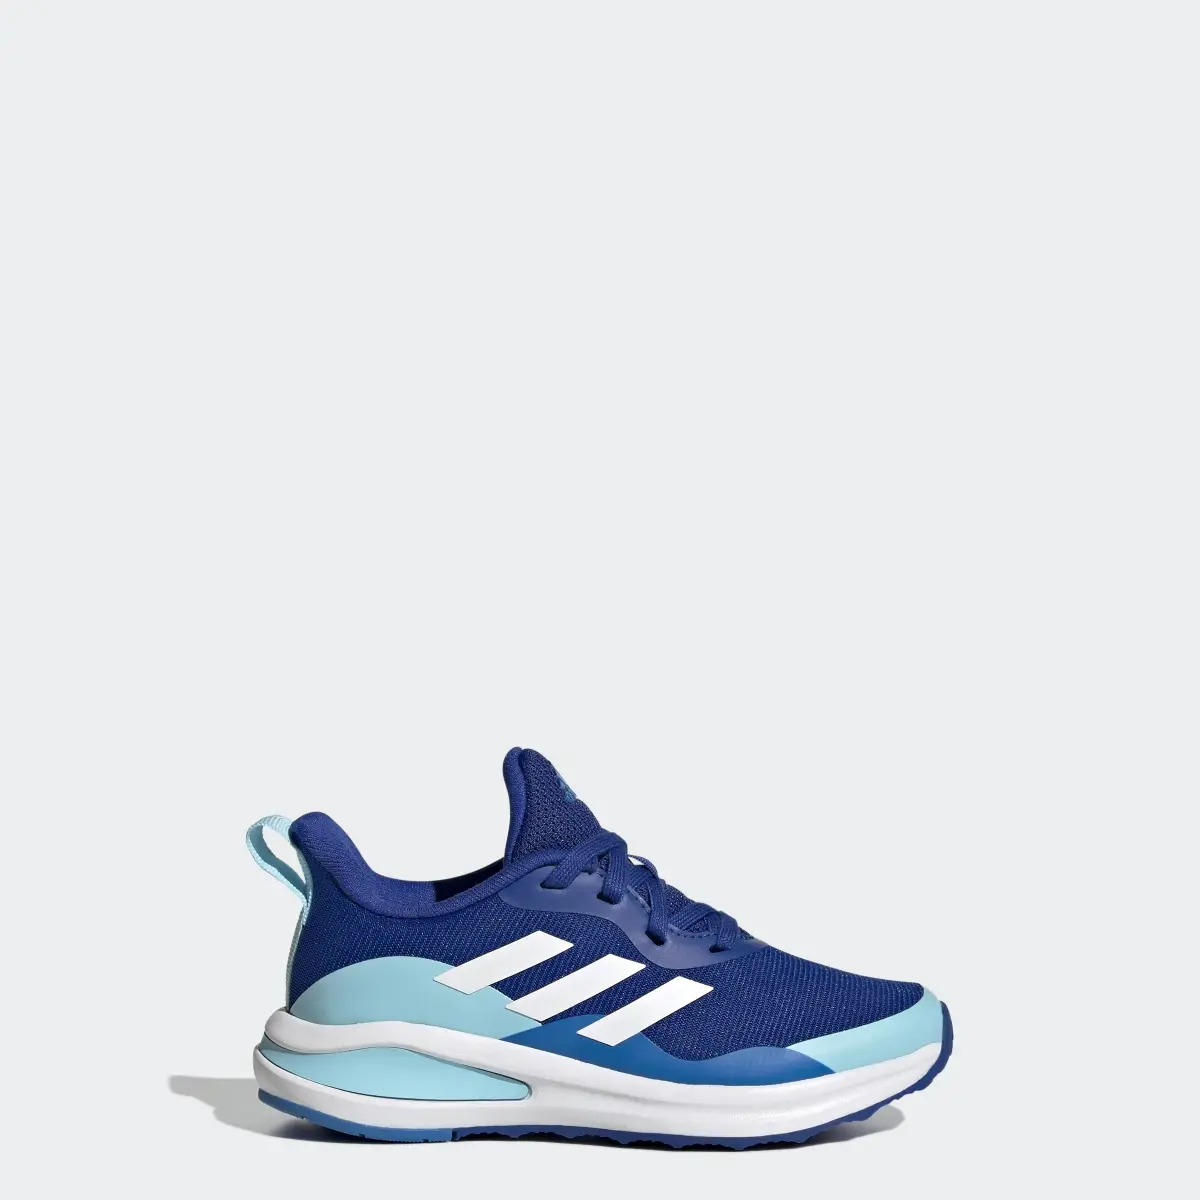 Adidas FortaRun Sport Running Lace Shoes. 1